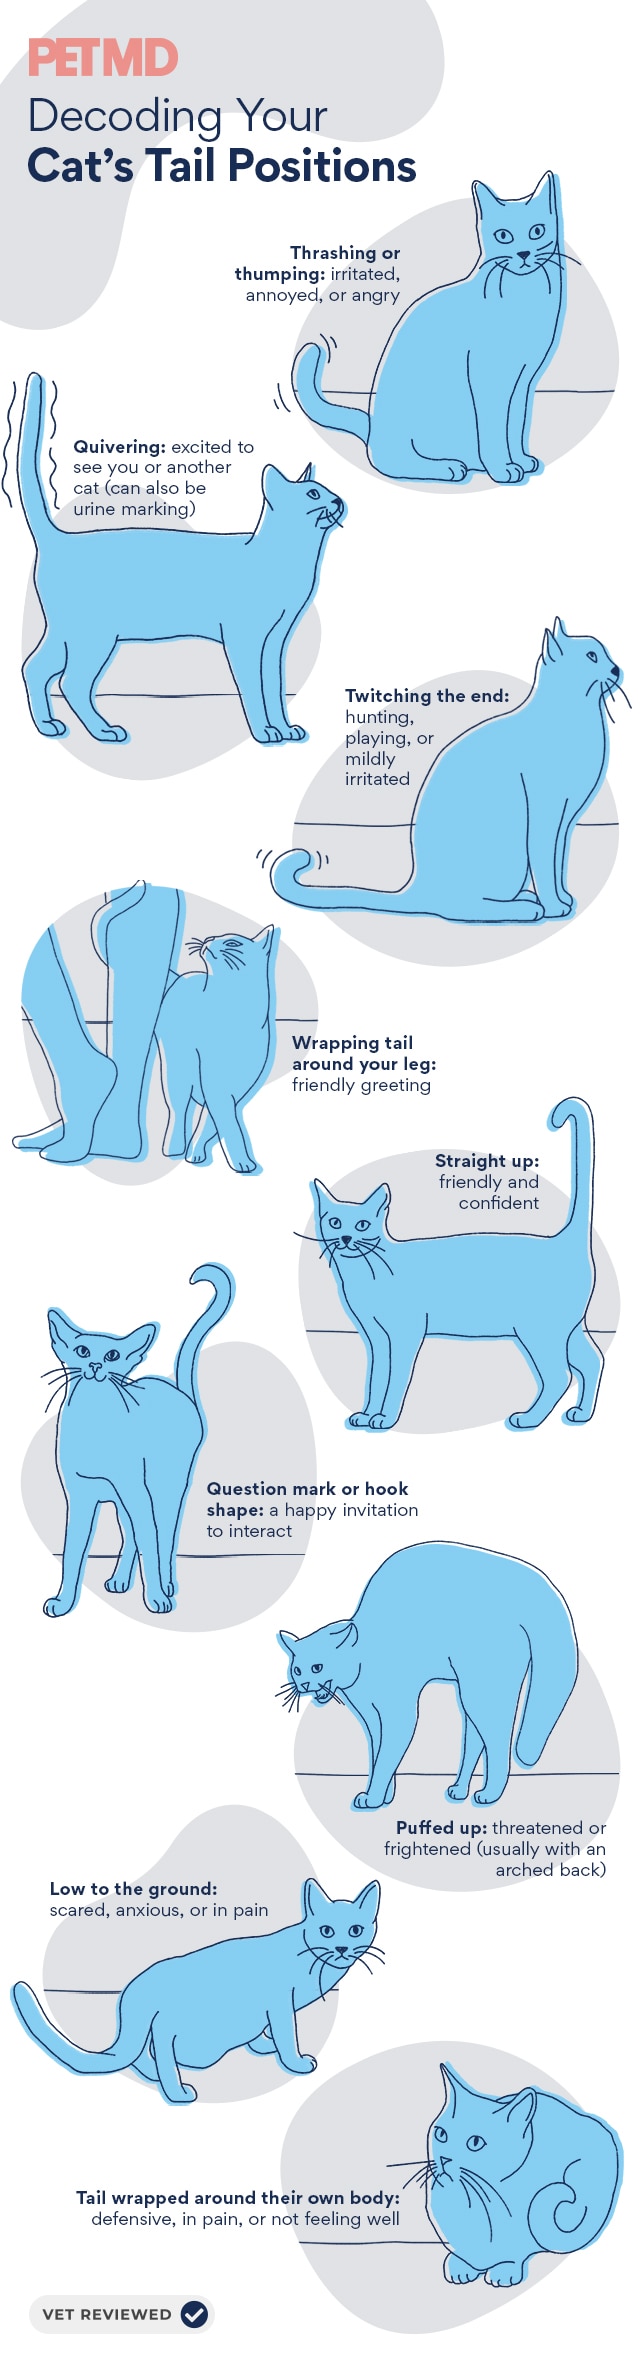 Cat Tail Language 101: Why Cats Wag Their Tails and More | PetMD